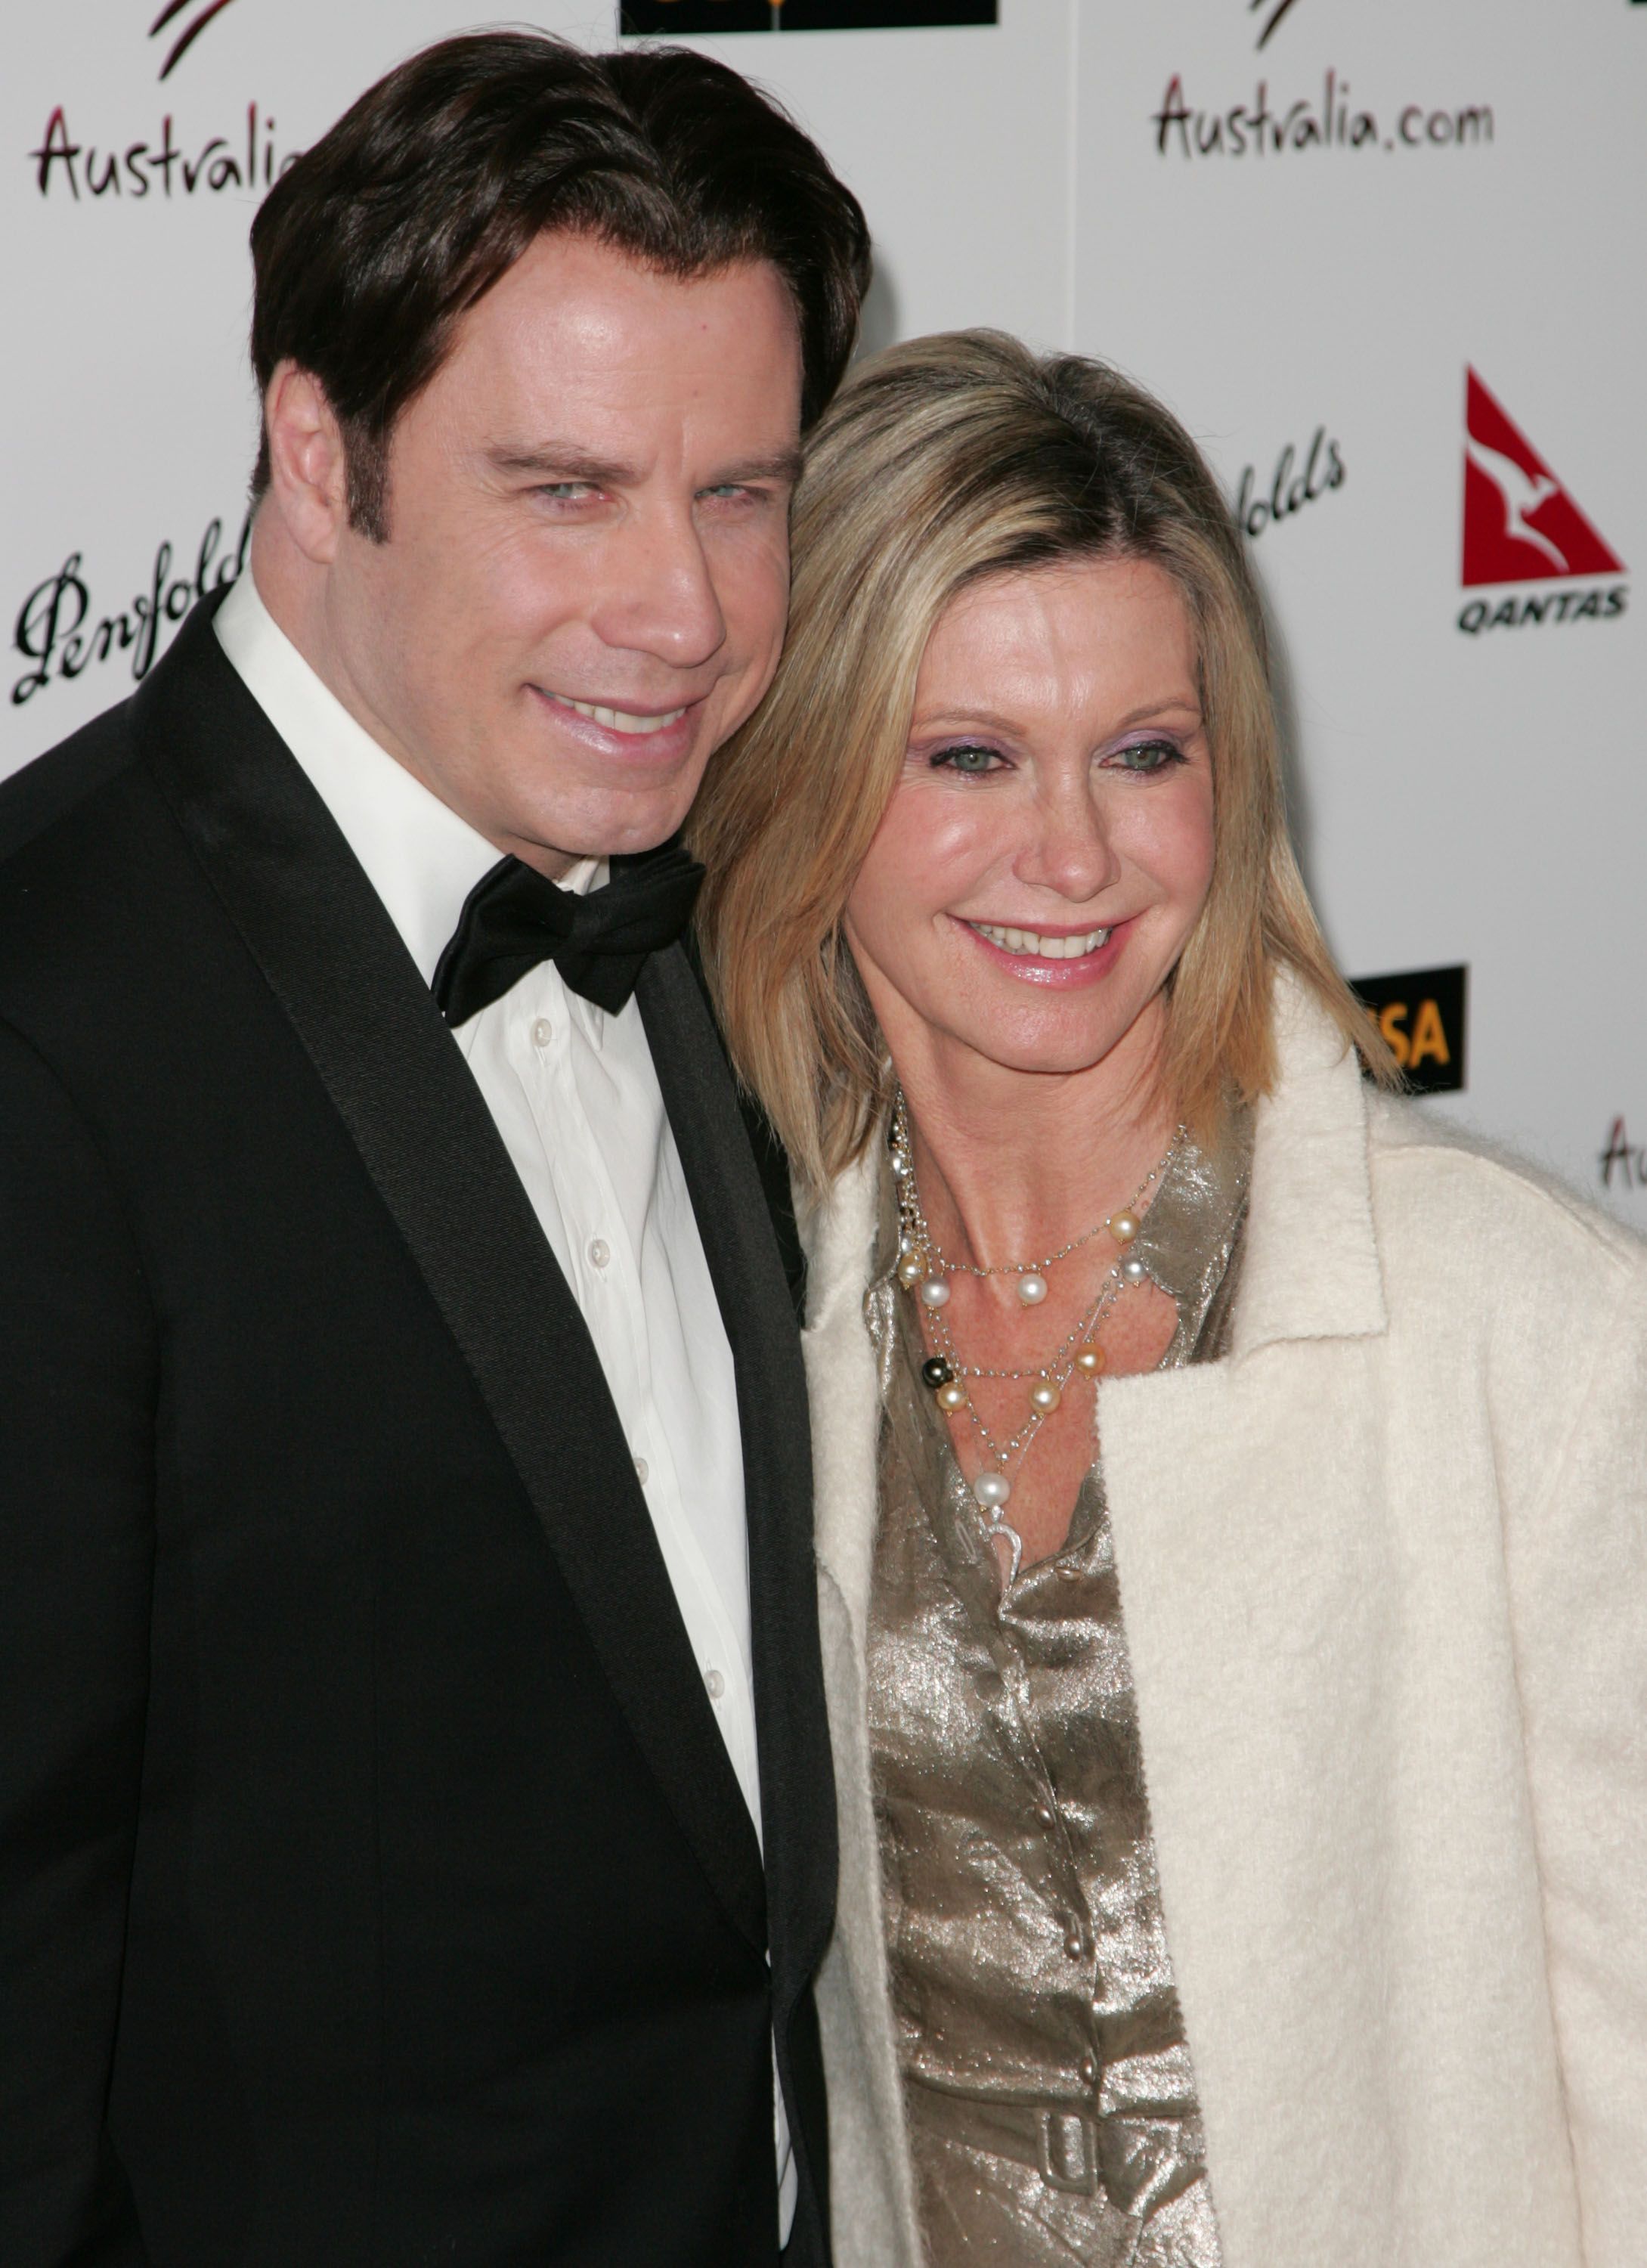 John Travolta and Olivia Newton-John during the G'DAY USA Australia.com Black Tie Gala held at the Hollywood and Highland Grand Ballroom on January 19, 2008 in Hollywood, California. | Source: Getty Images